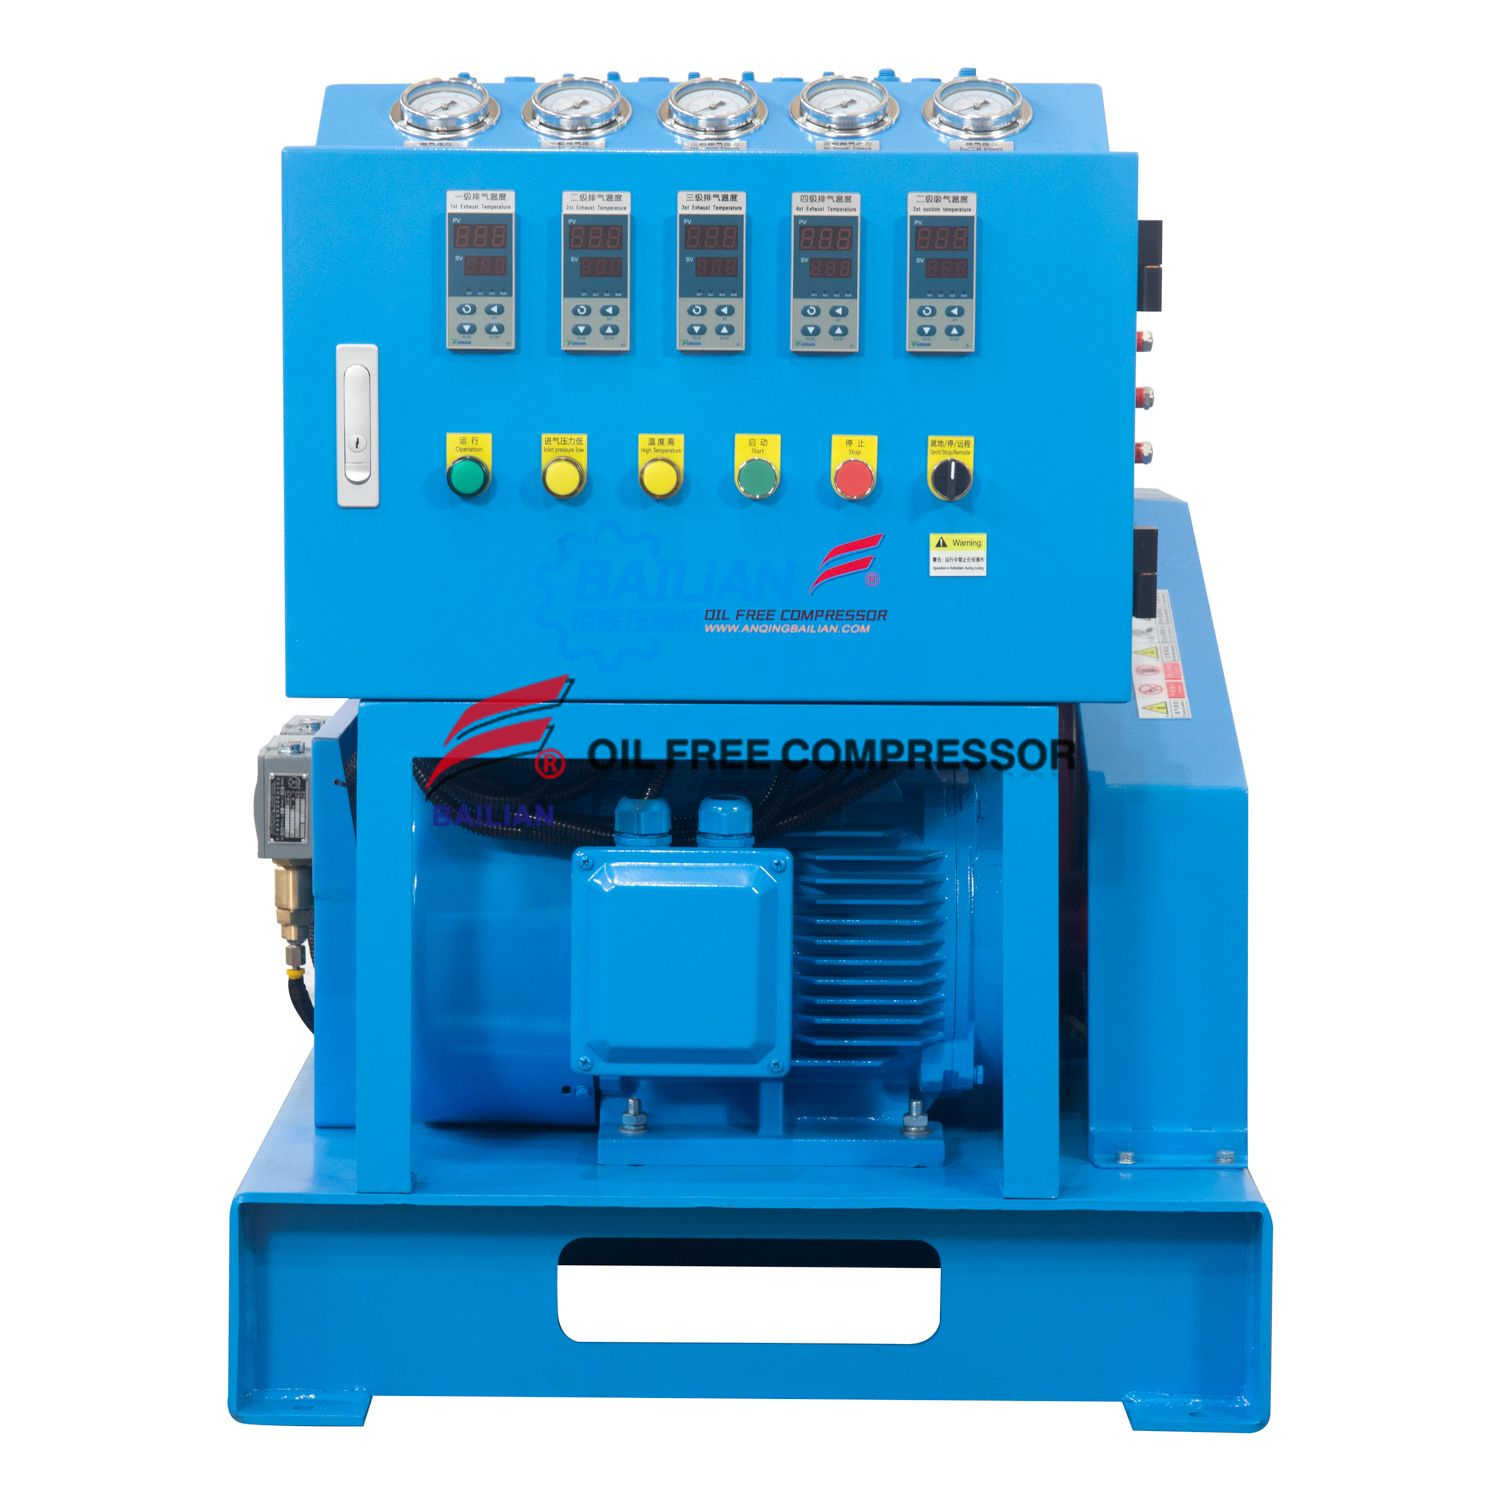 GOW-18/4-150 100%Totally Oil Free Type Oxygen Compressor